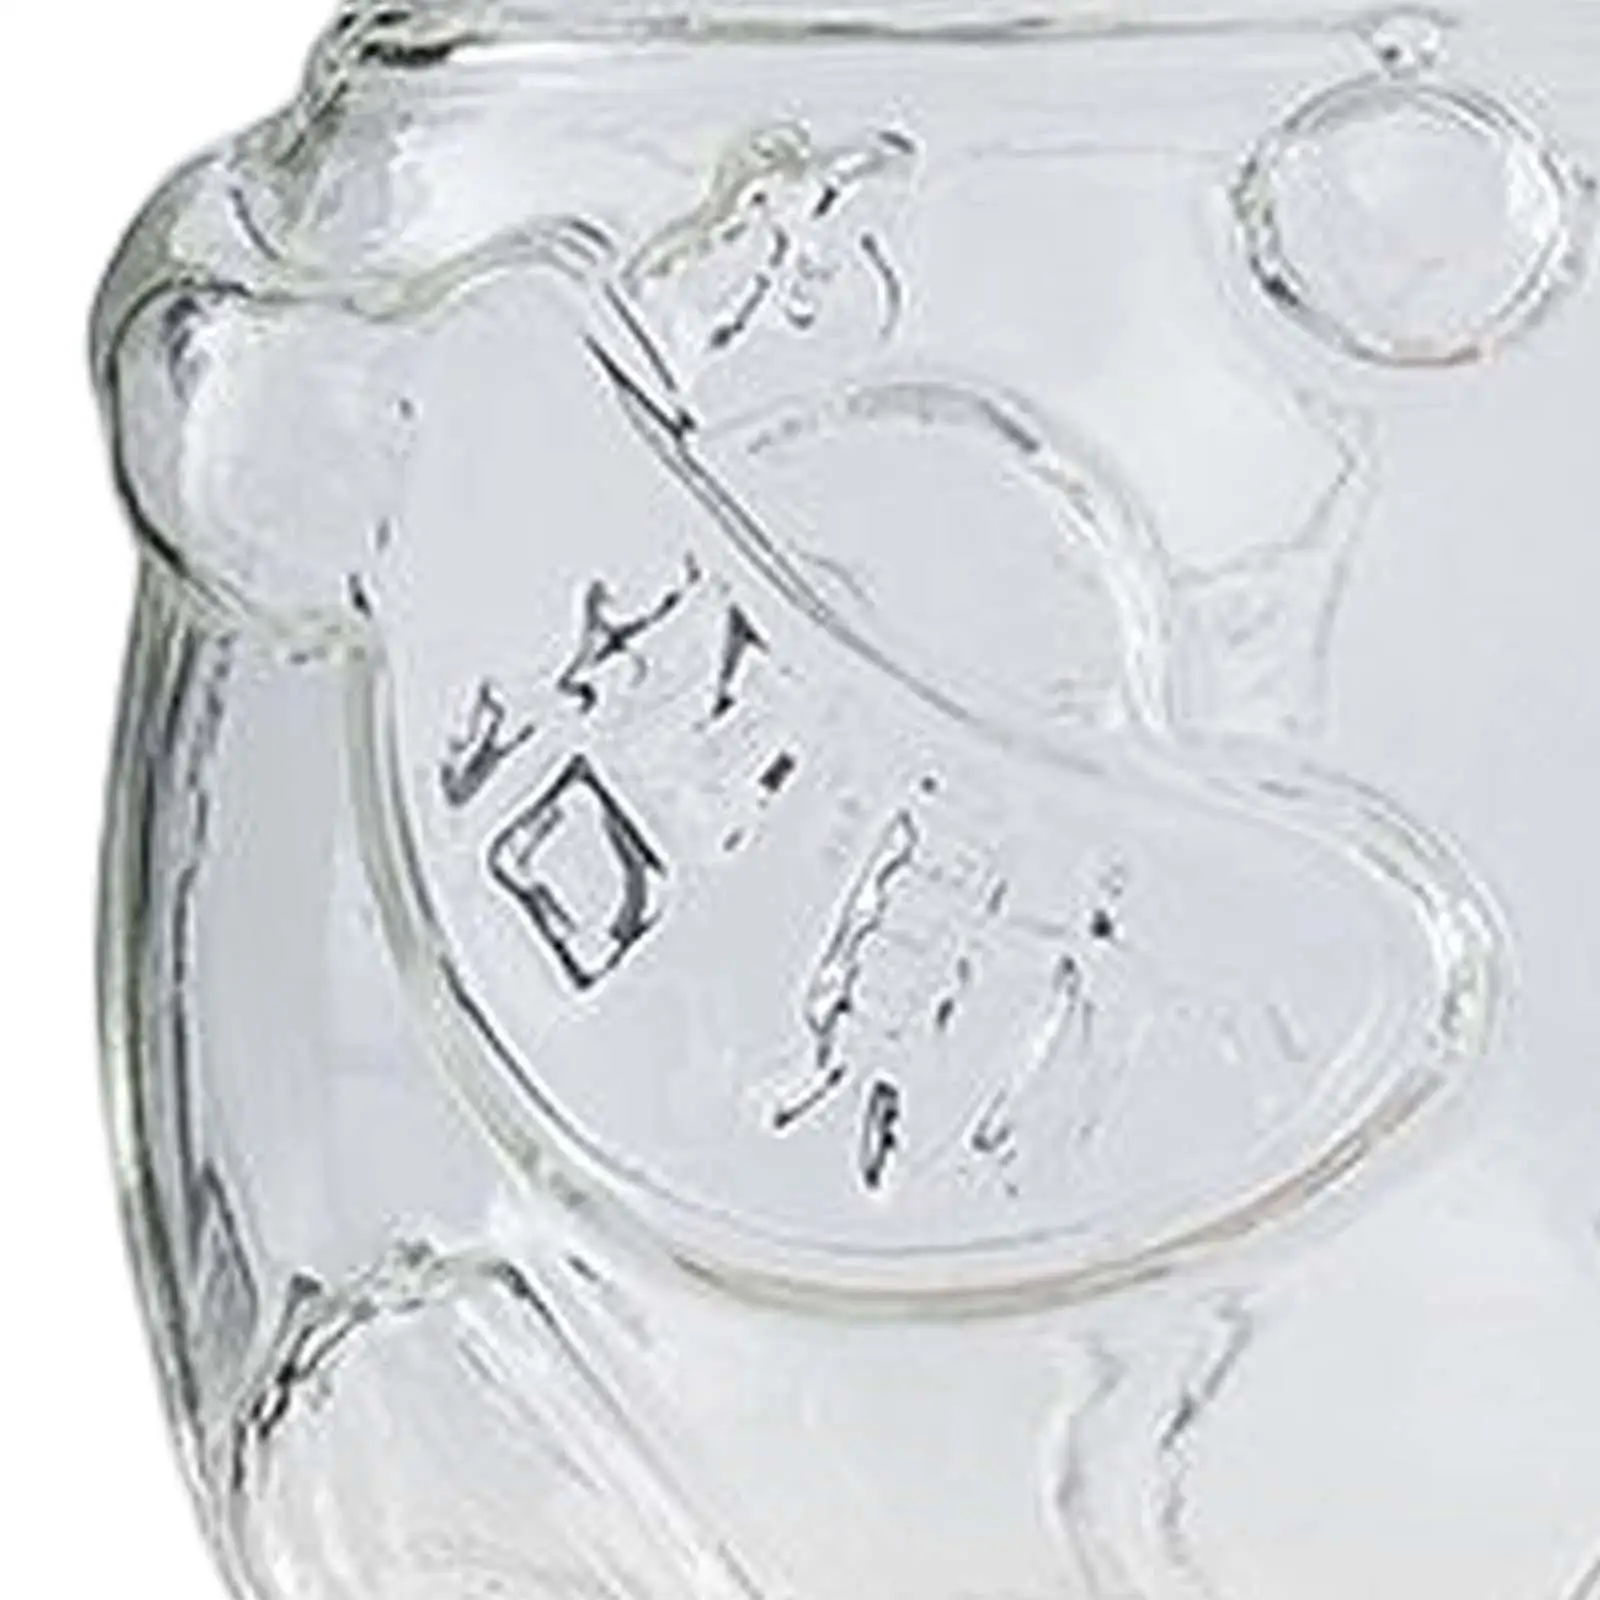 Clear Glass Lucky Cat Piggy Bank Saving Money Box Decoration Ornaments Crafts for Gift